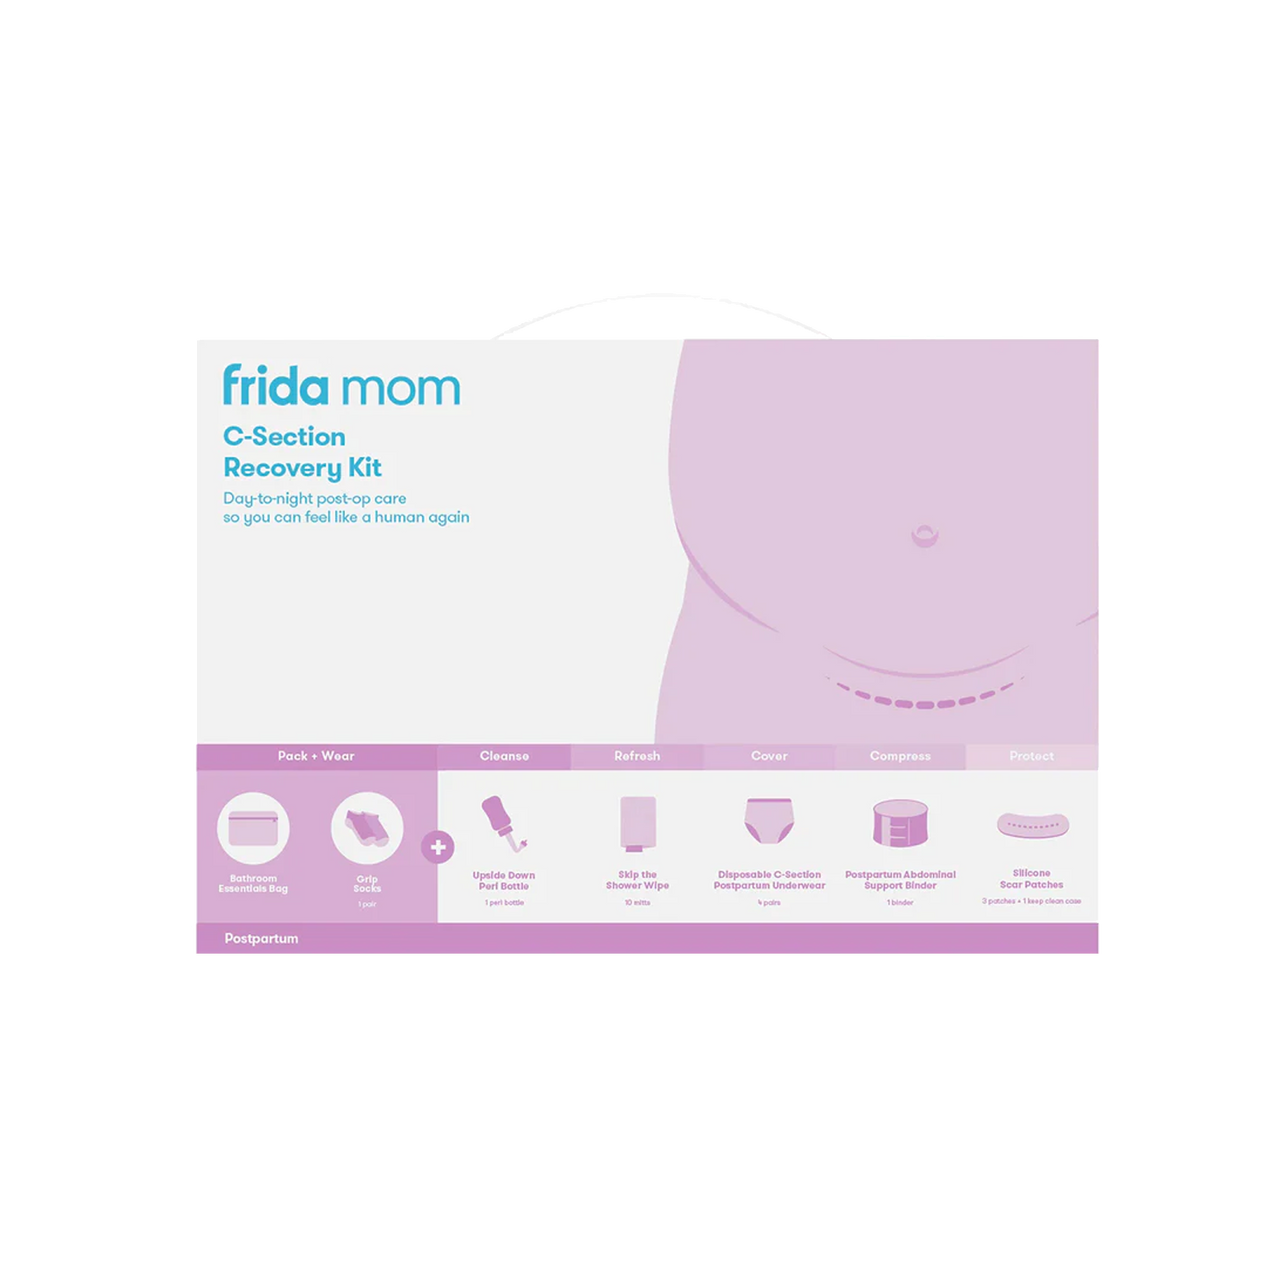 Frida Mom C-Section Recovery Band